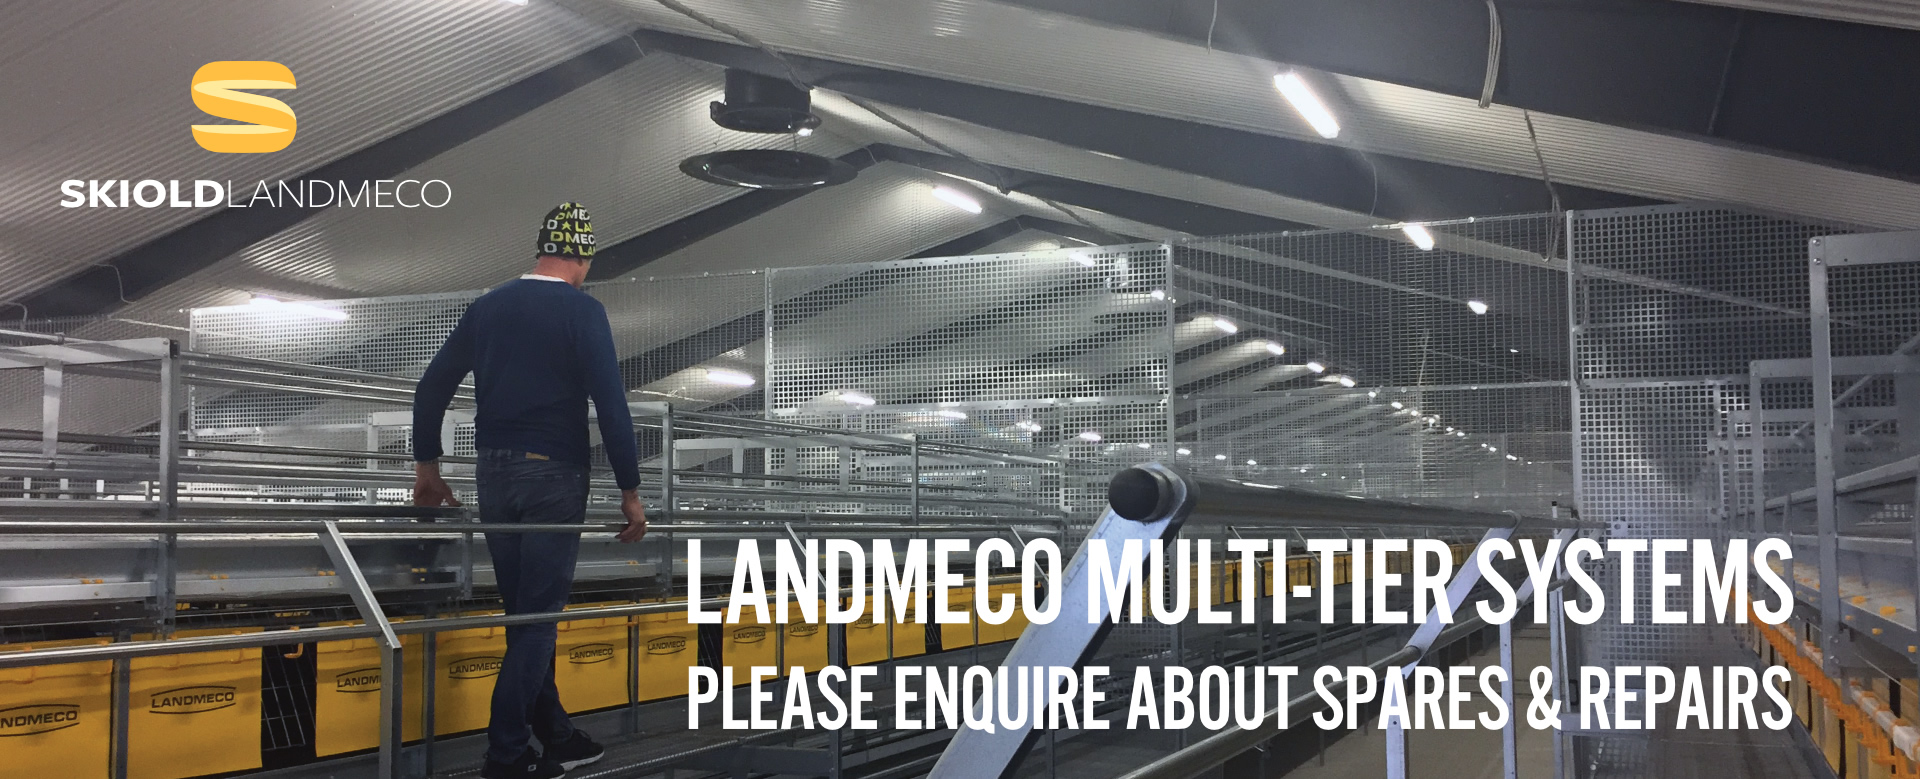 Skiold Landmeco Multi-tier systems. Please enquire about spares and repairs